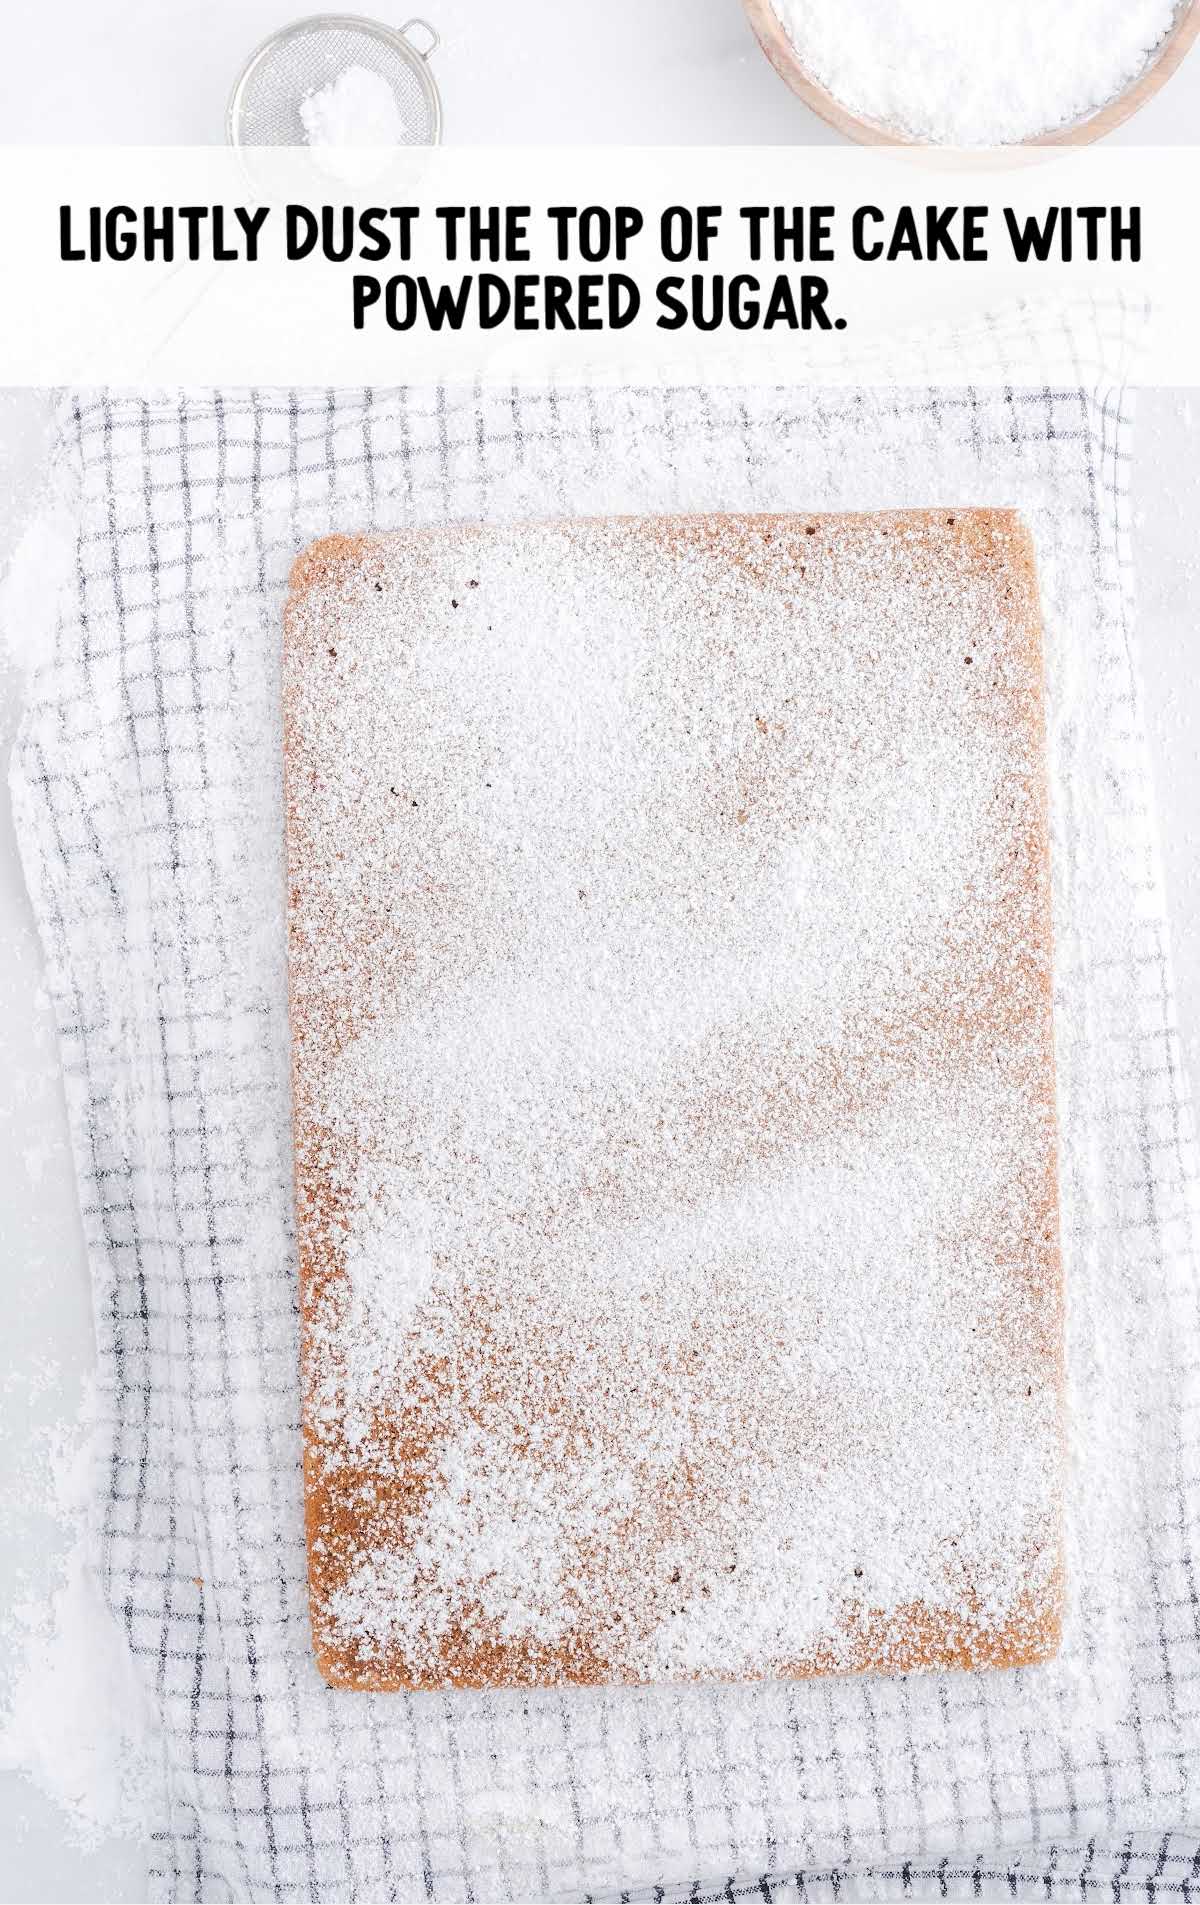 Pumpkin Roll process shot of powdered sugar being dusted on the top of the cake